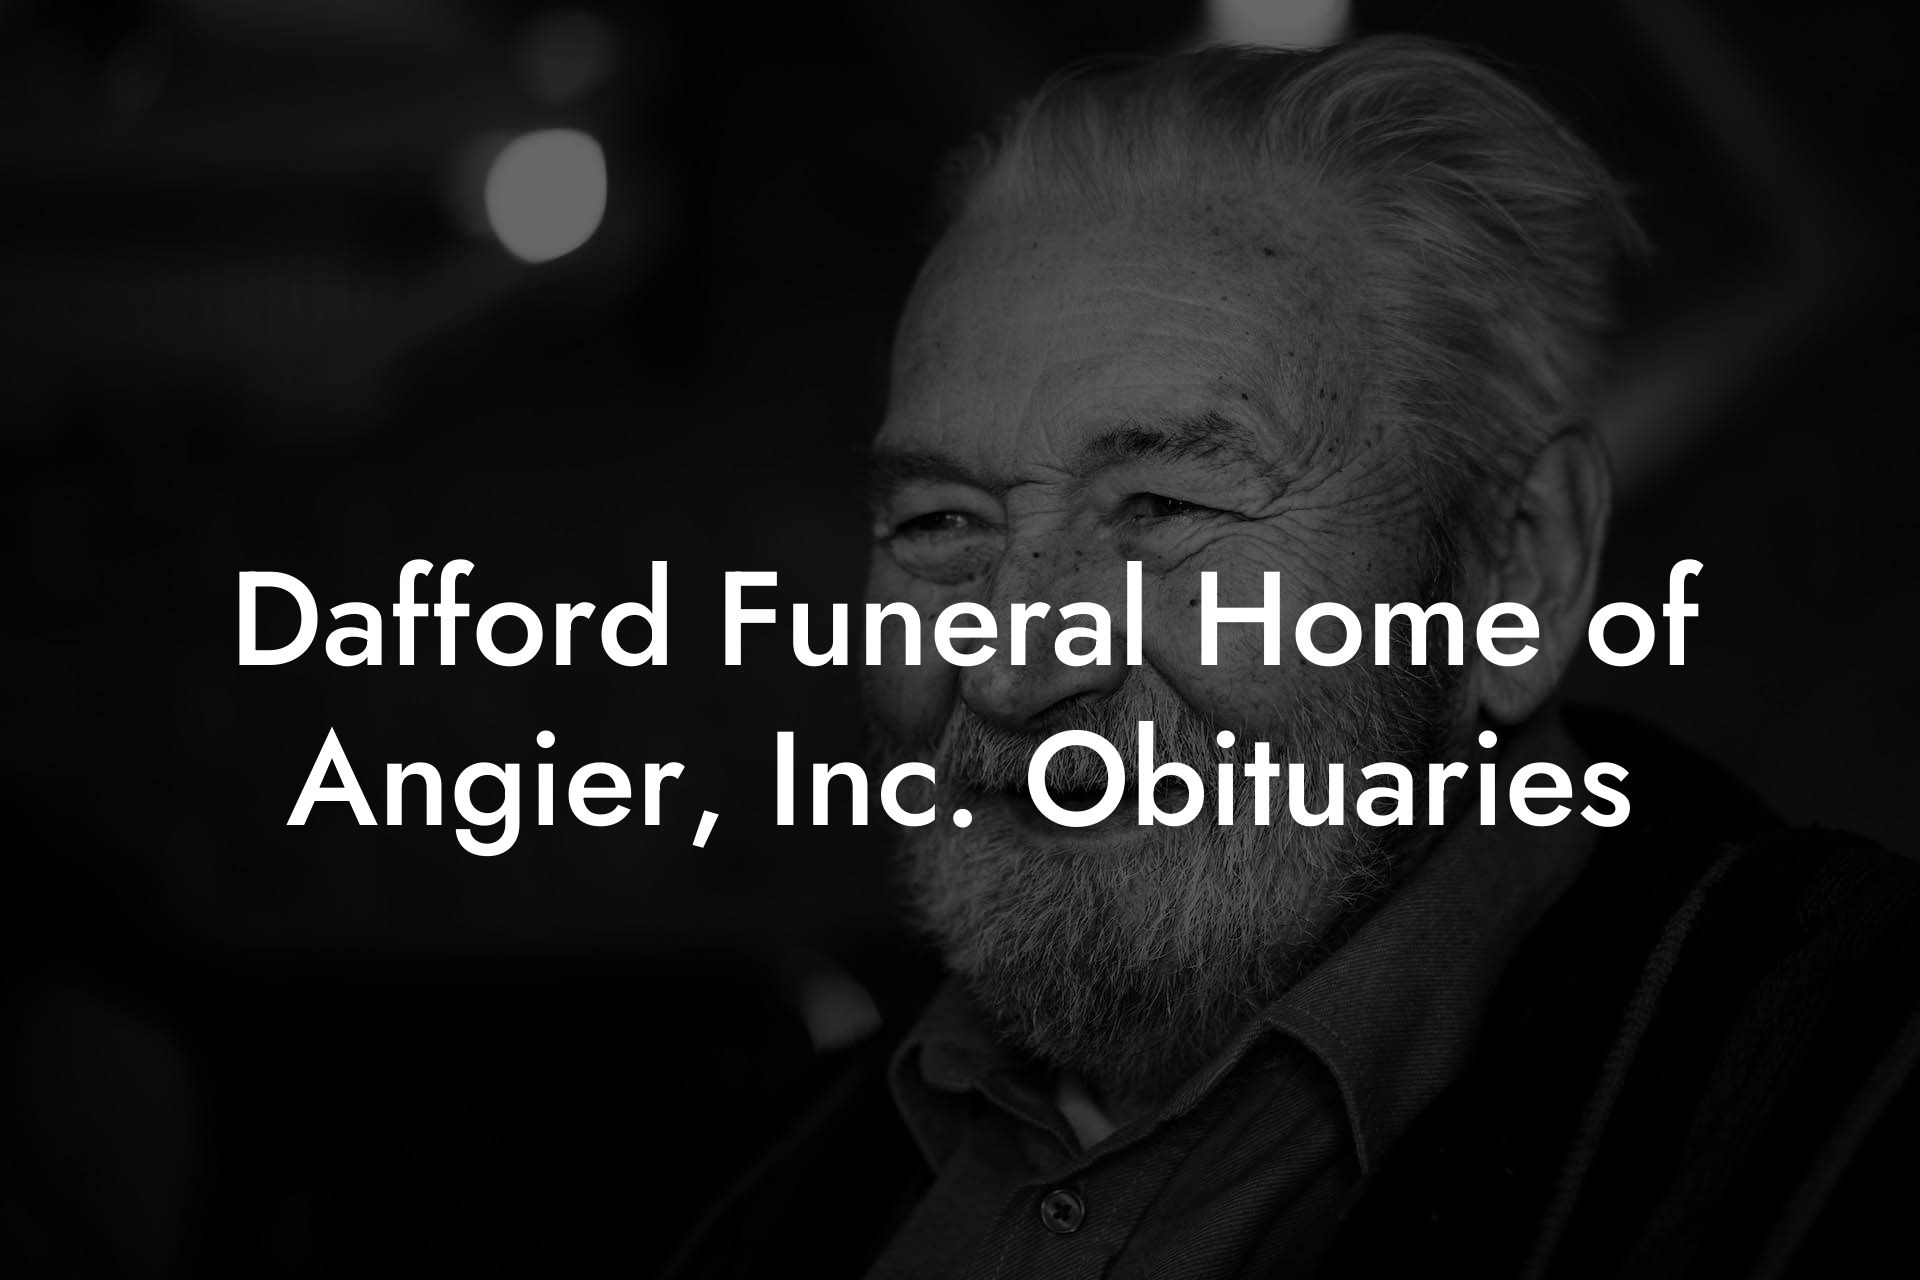 Dafford Funeral Home of Angier, Inc. Obituaries